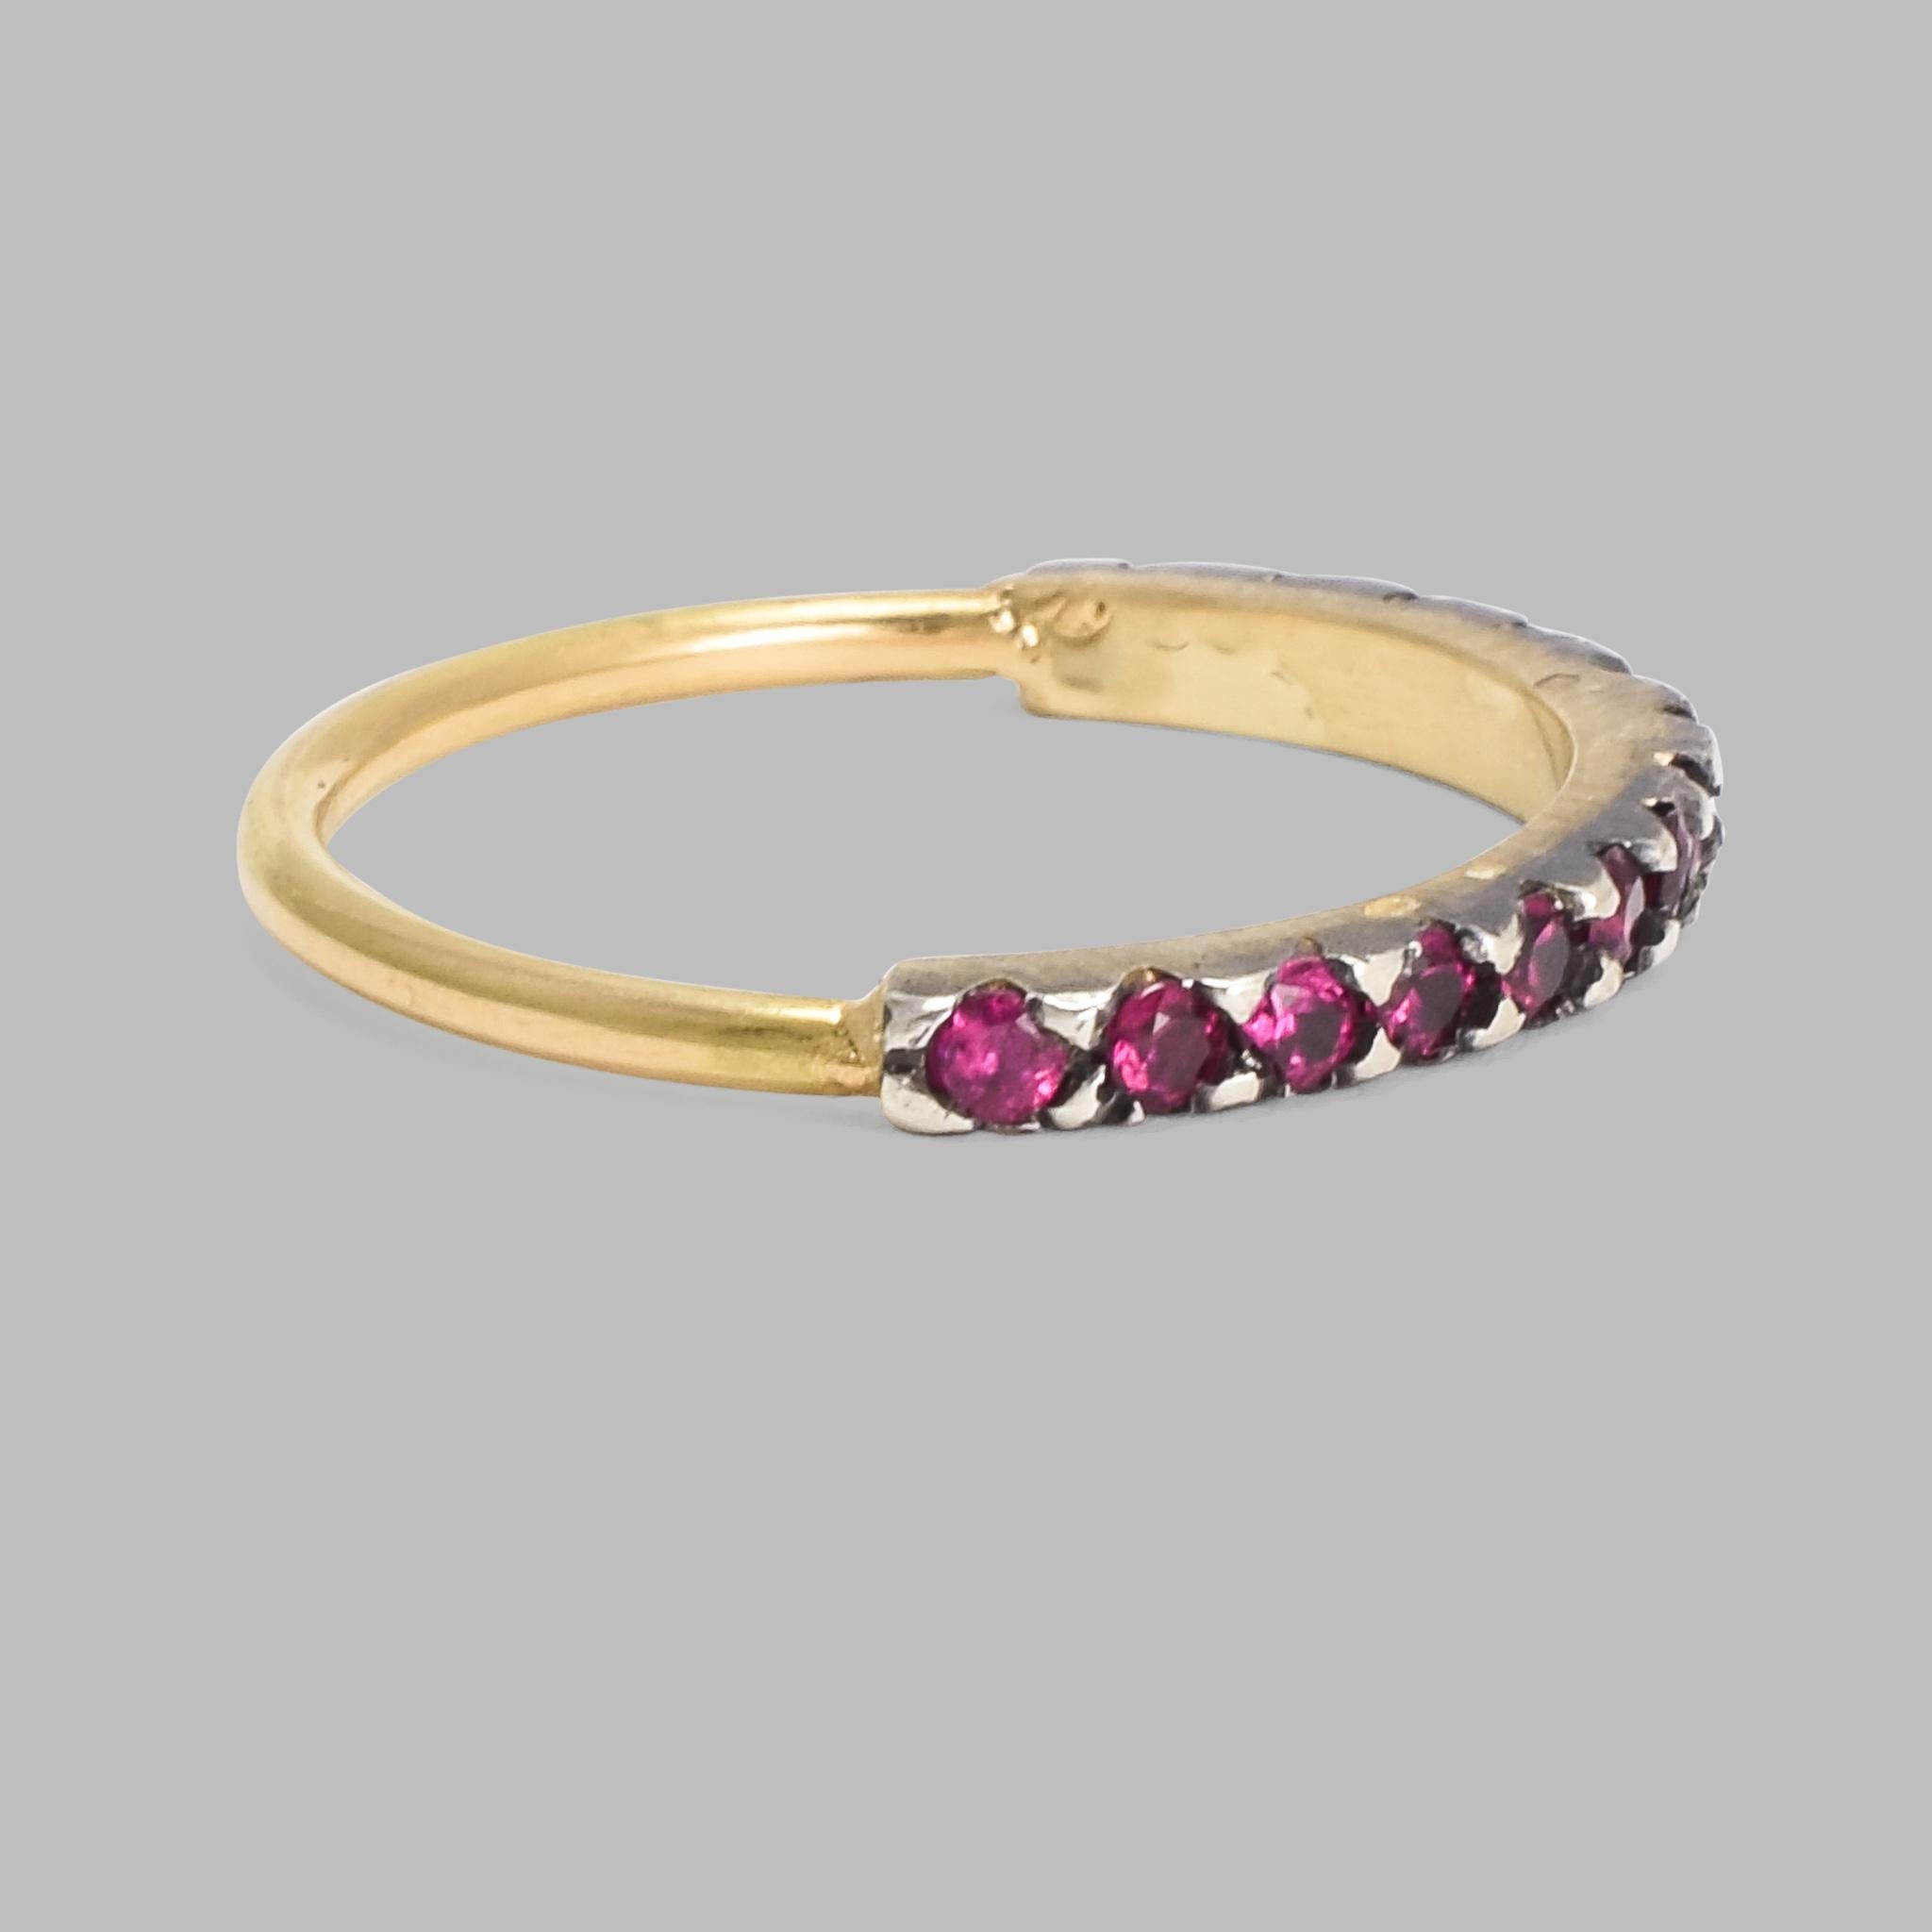 BL Bespoke Collection

The perfect stacking band.

A Georgian-inspired half hoop band set with a row of natural rubies in silver mounts. The ring is complete by a simple 18 karat gold band, made entirely by hand in London, England. It's a classic